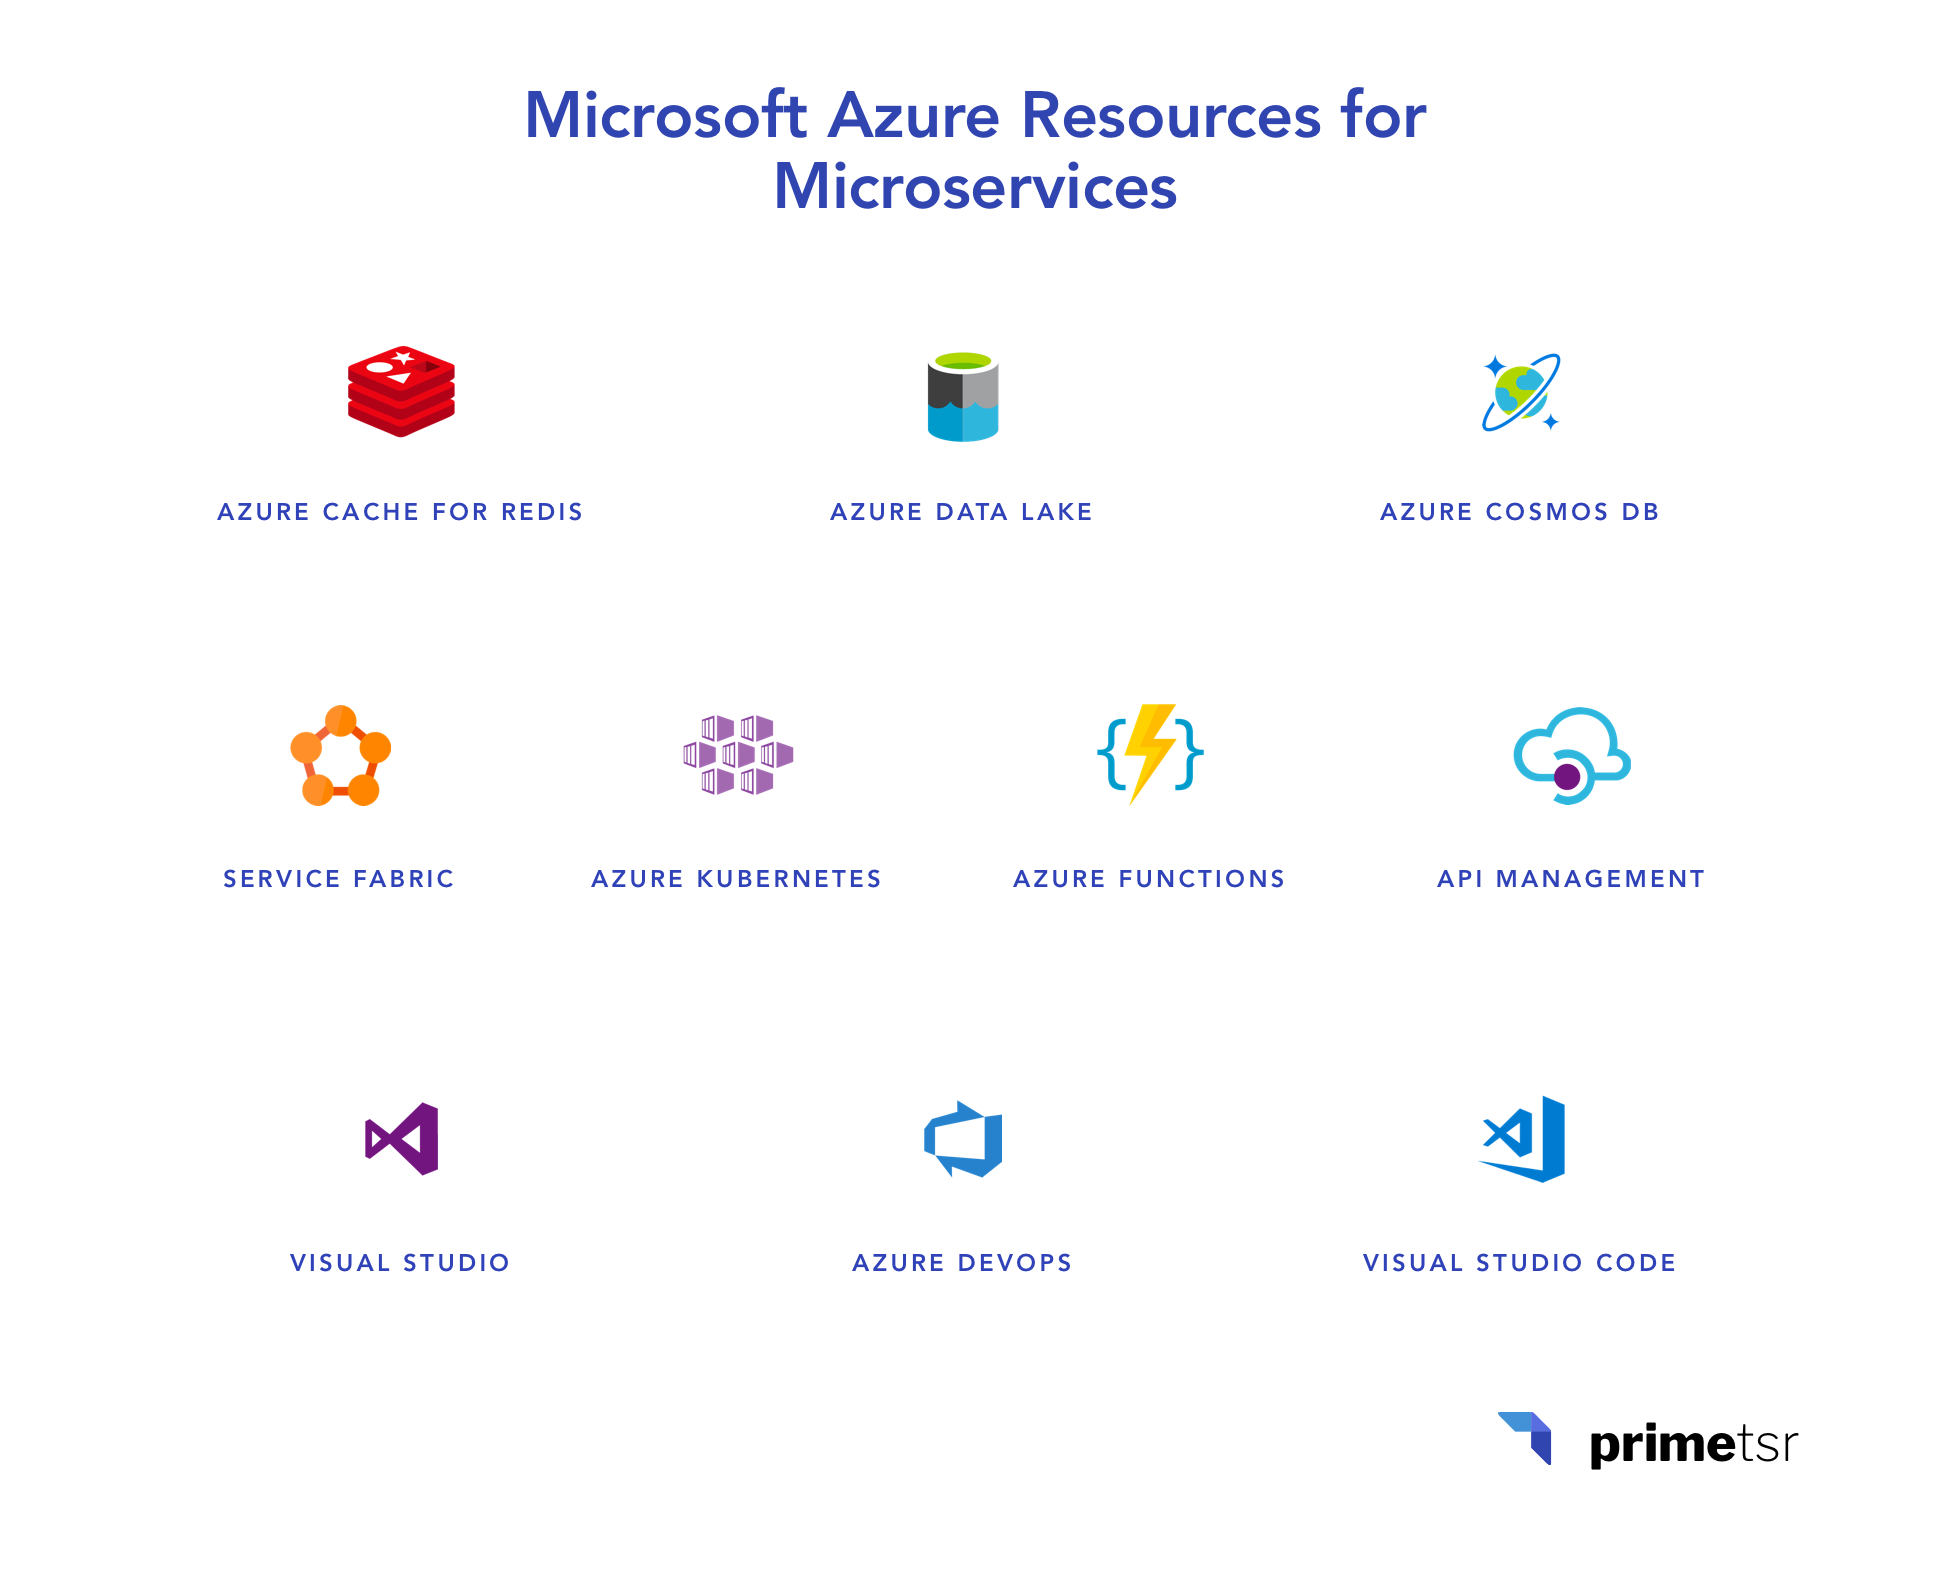 microsoft azure tools and resources for microservices